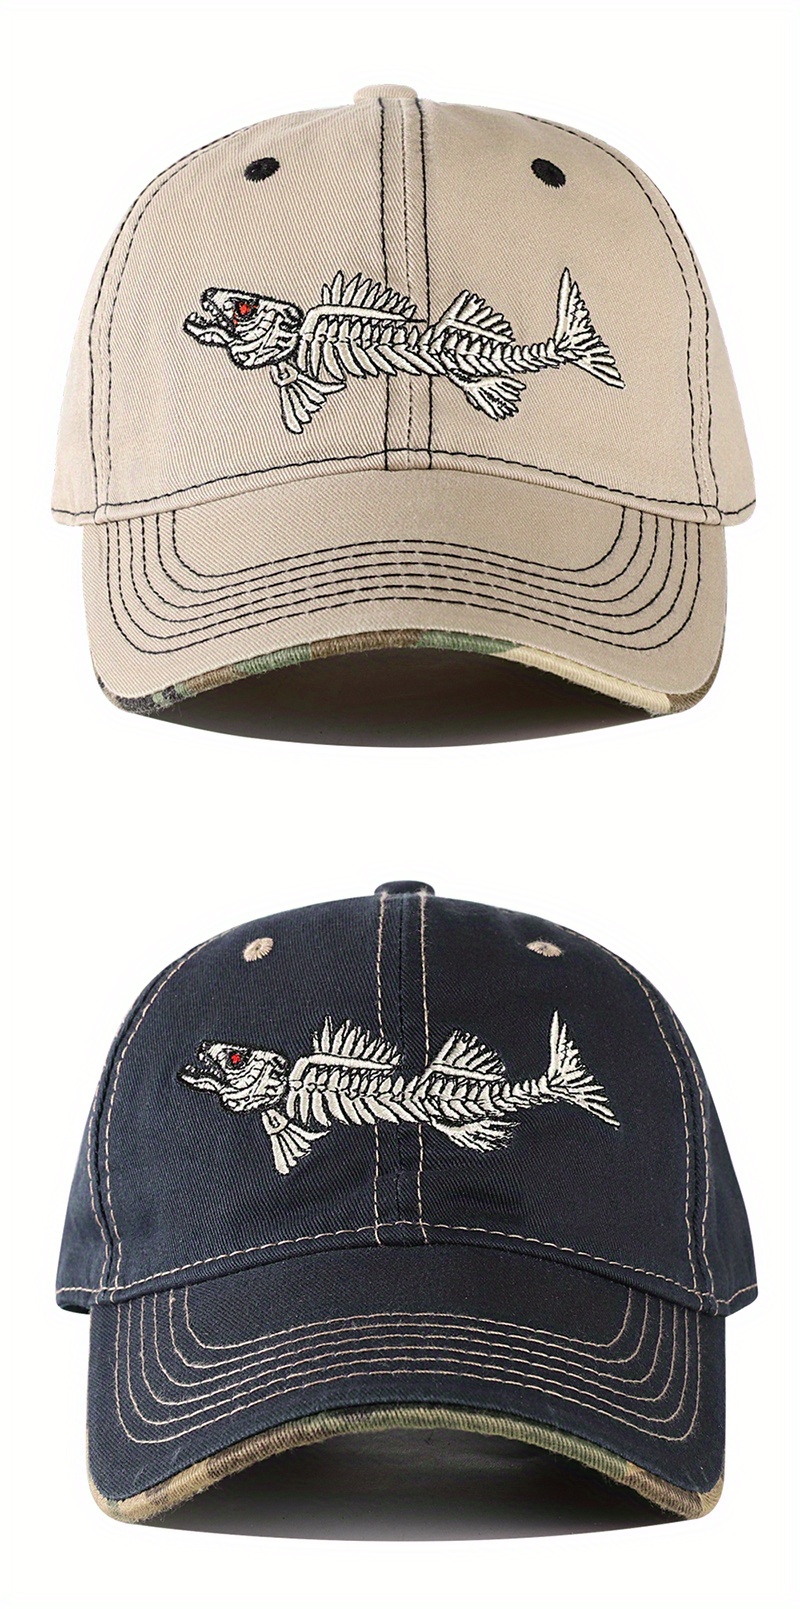 Fishbone Embroidery Baseball Cap, All-Match Outdoor for Men and